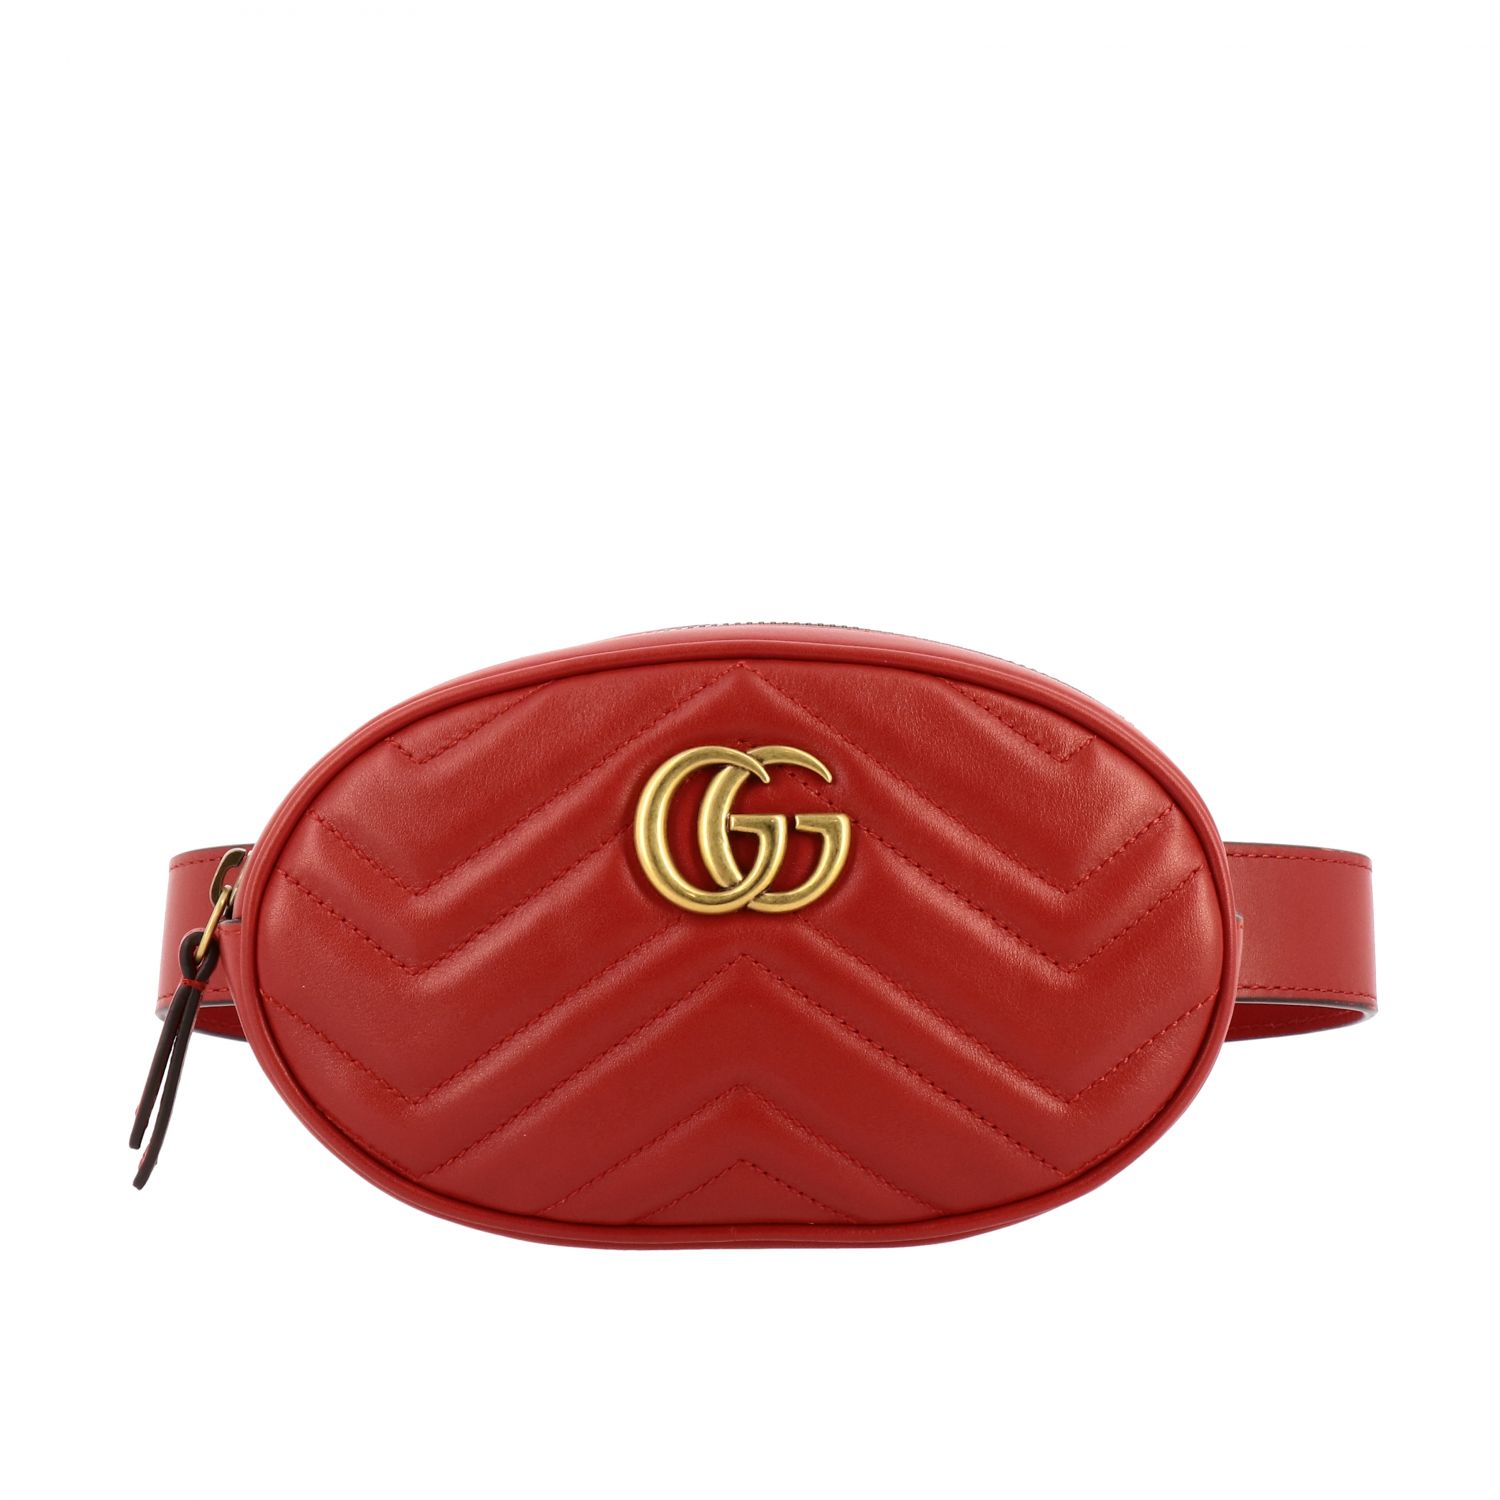 GUCCI: GG Marmont belt bag in chevron leather - Red | Gucci belt bag